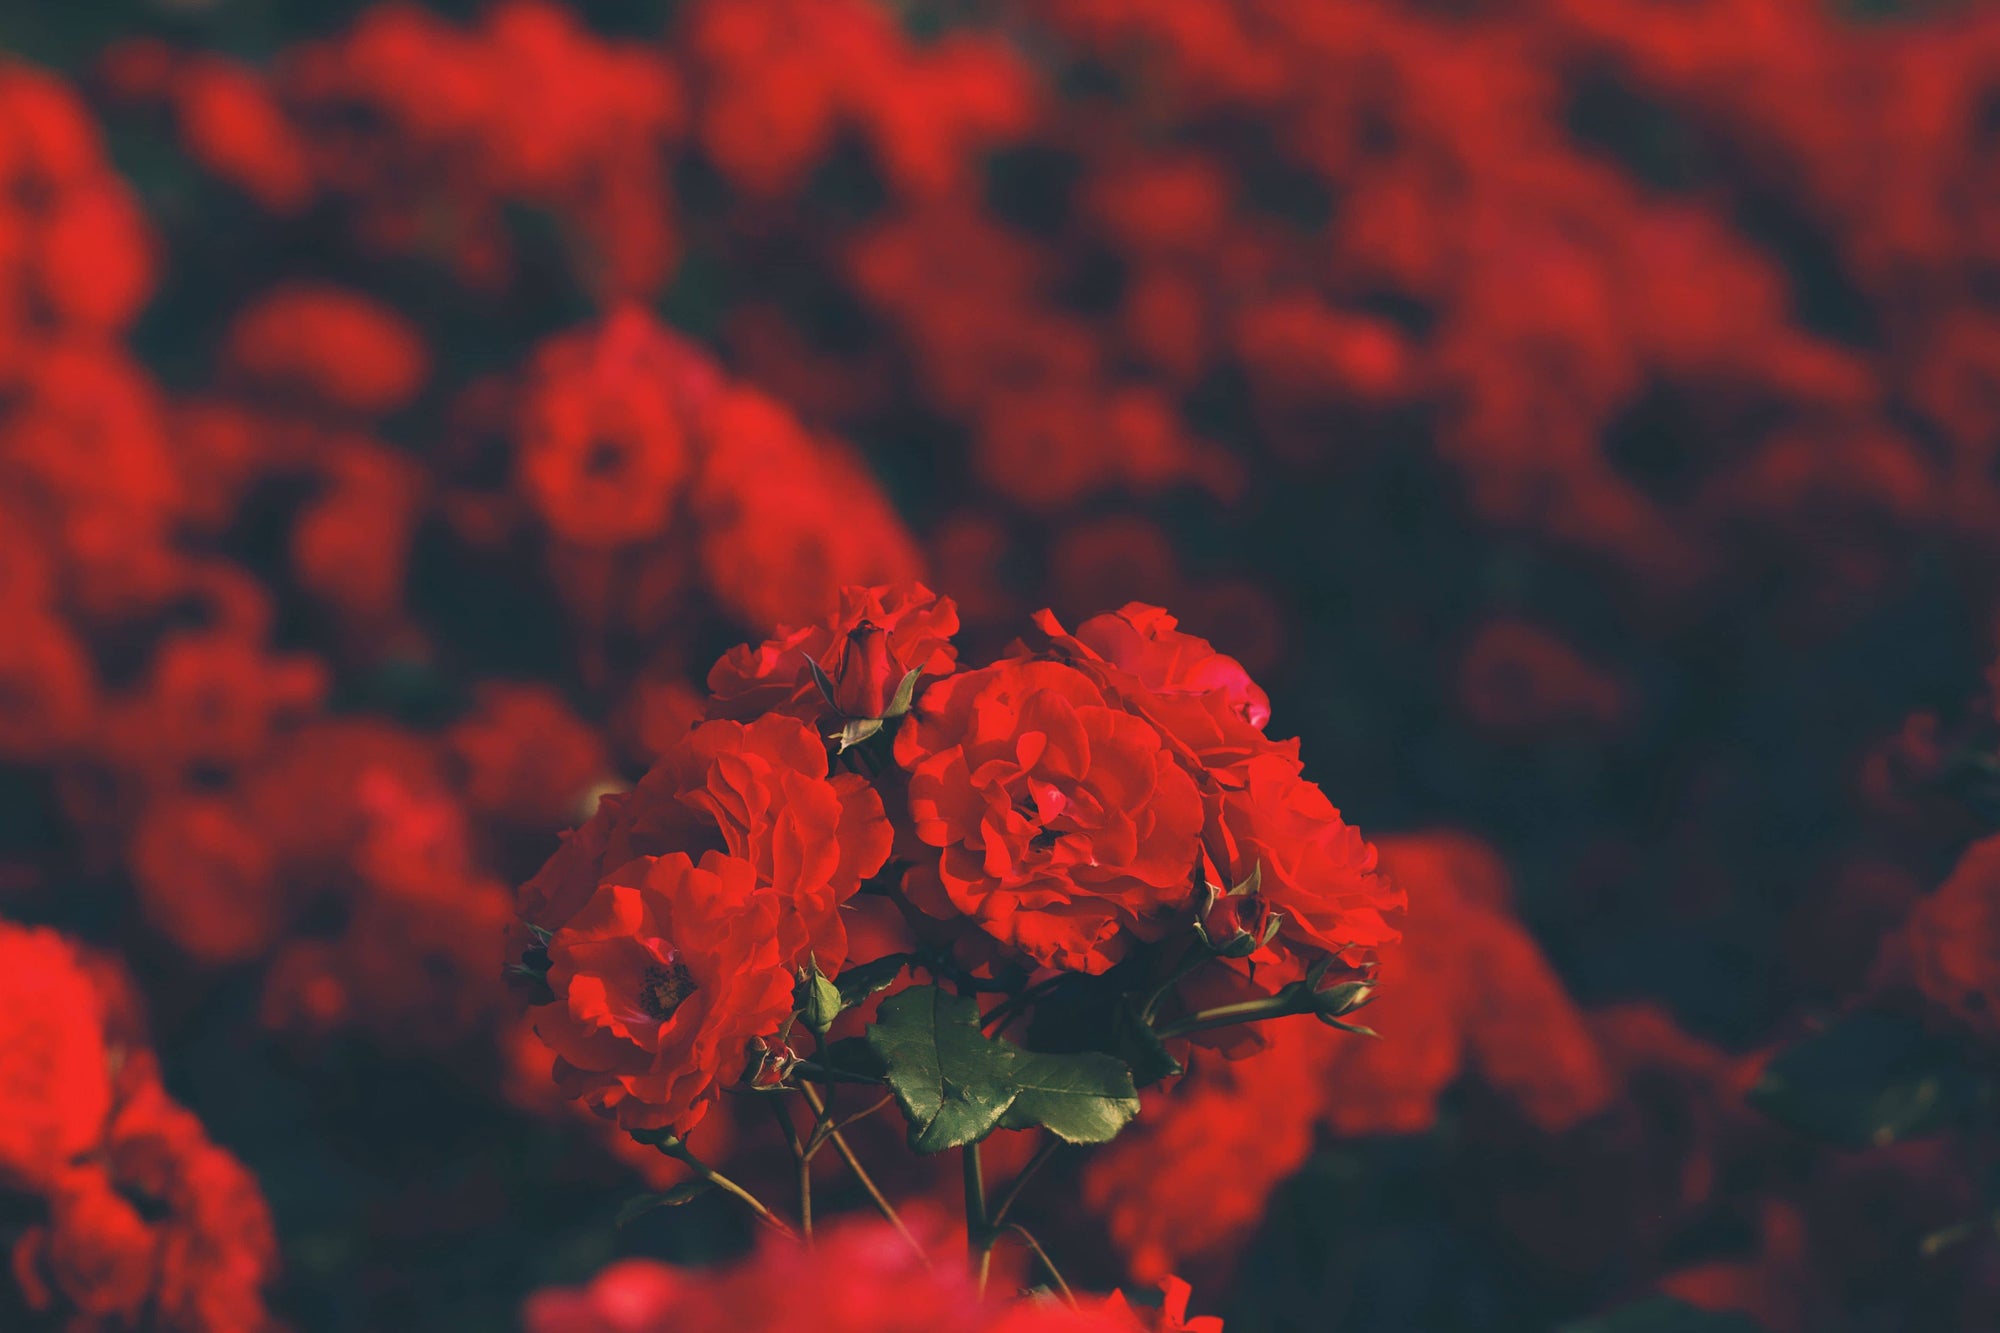 Portrait of red roses for Valentine's Day 2019